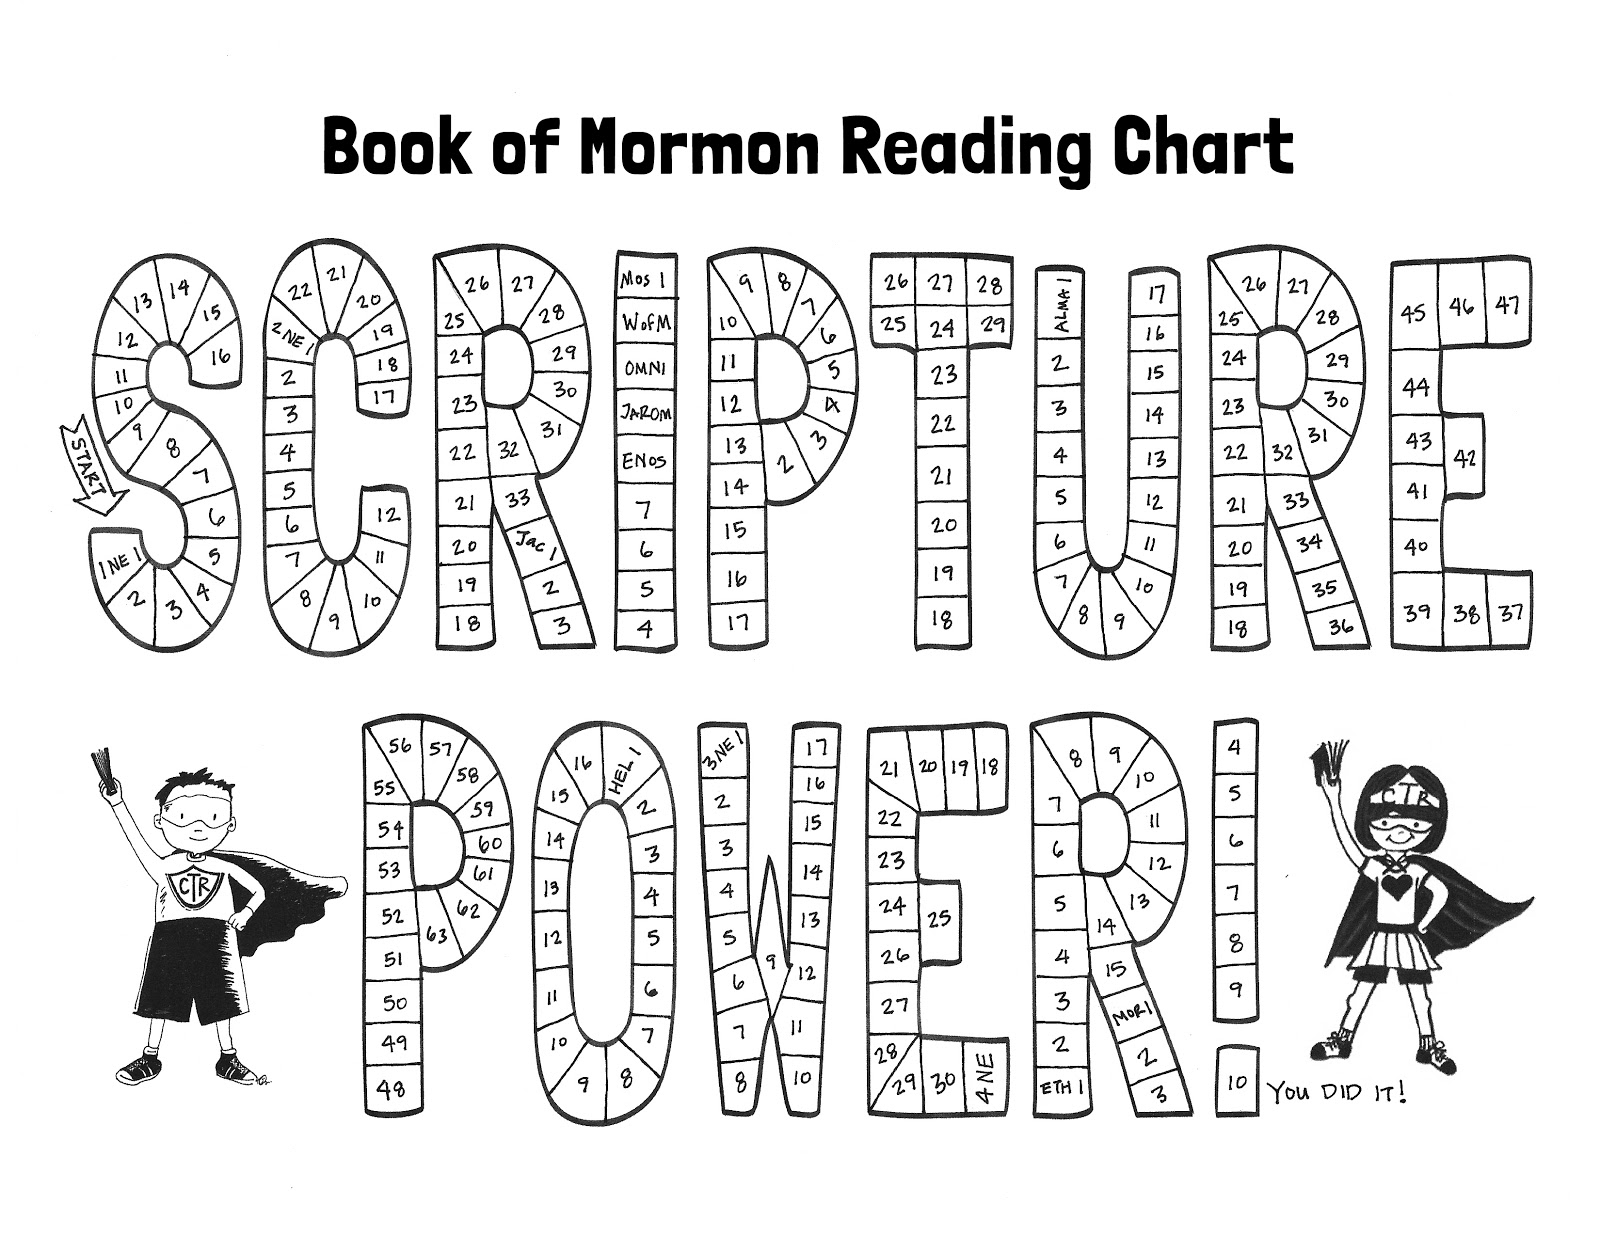 Boys, Buildings, Books and Berries: Book of Mormon Reading Chart